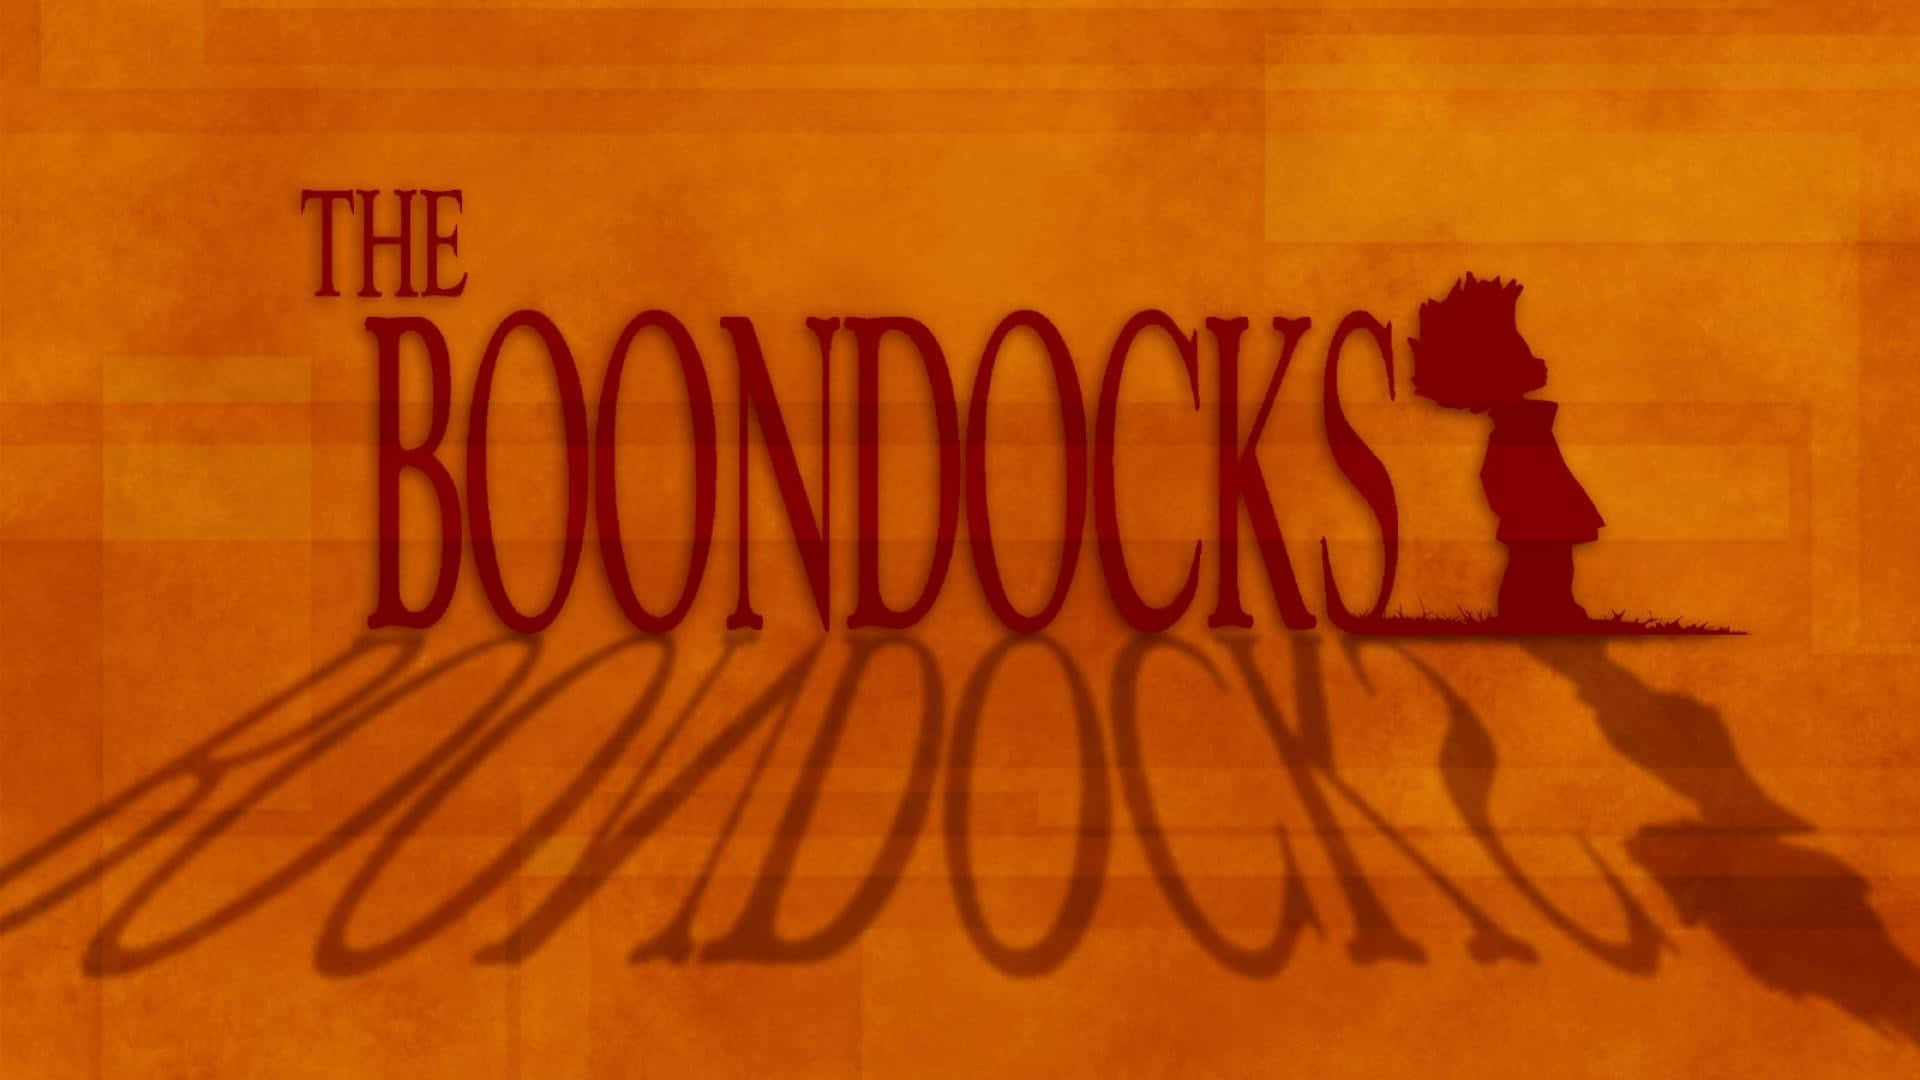 Join Huey, Riley and Grandpa Freemont on their adventures in The Boondocks!